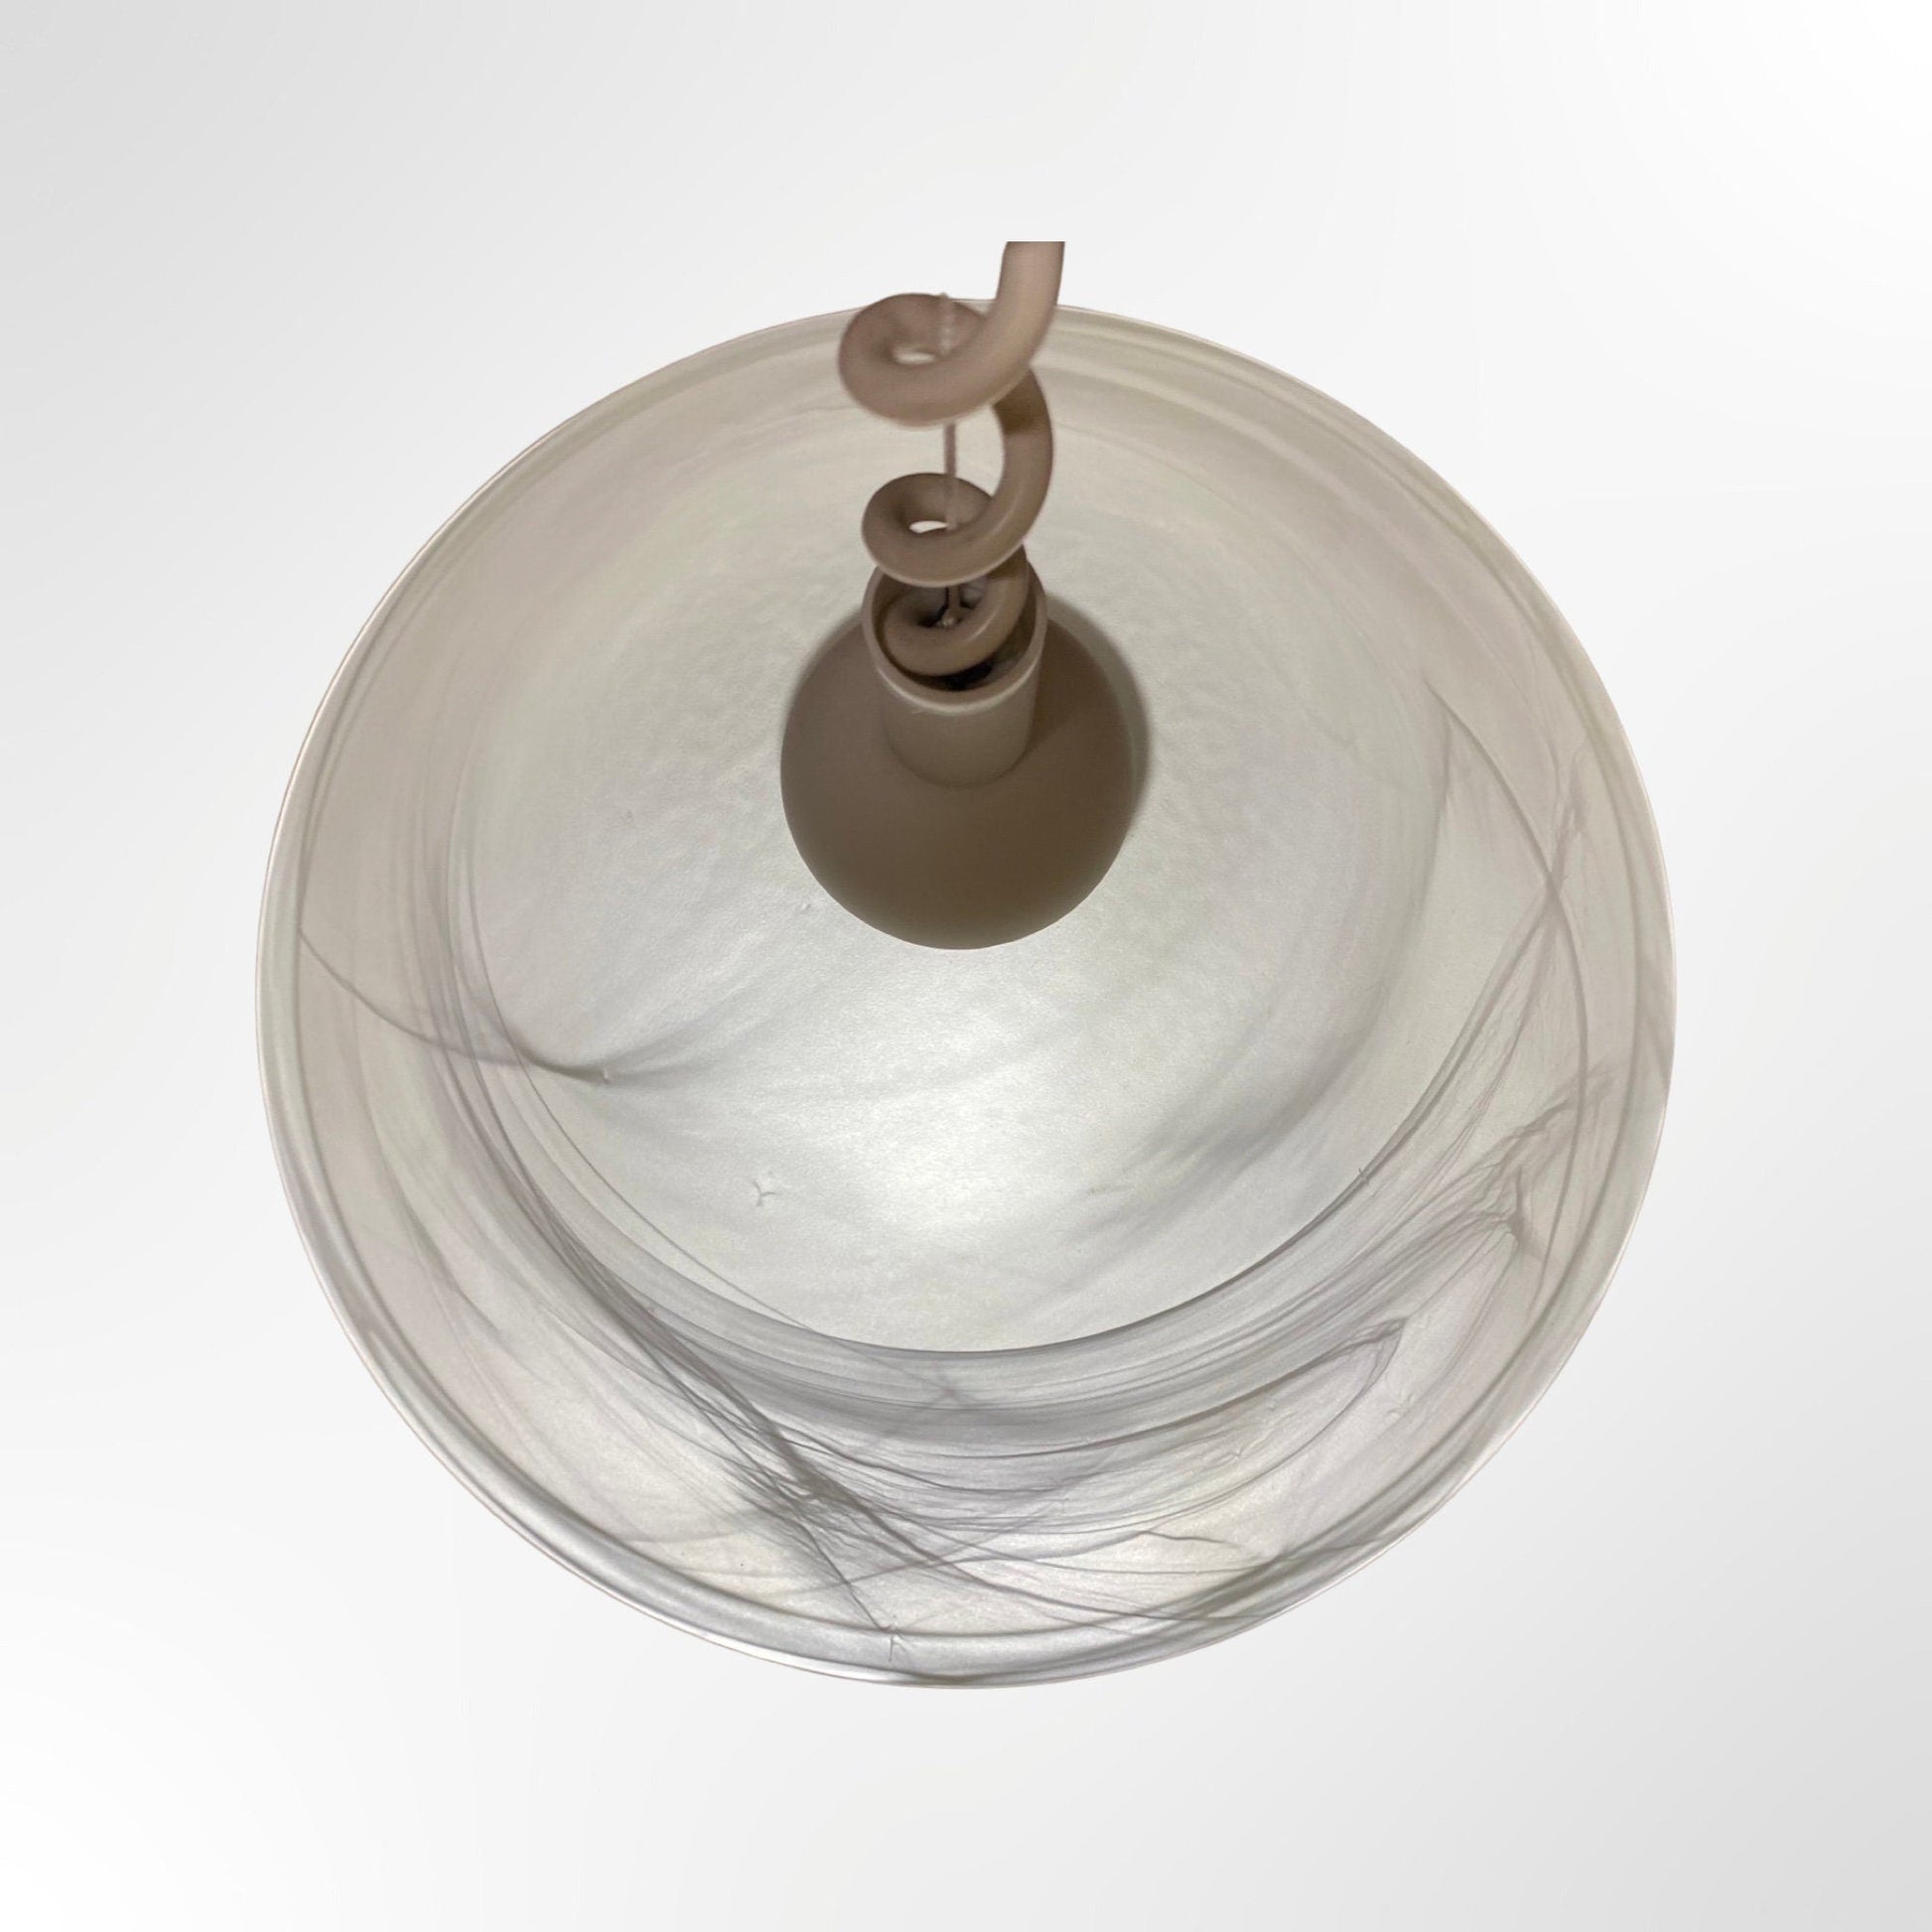 1960s Vintage Alabaster Glass Pendant Lamp| Mid Century Modern Hanging Lamp Made Of Albast Glass | Made By EDI Light | Adjustable in Height - FancyVintage.nl -